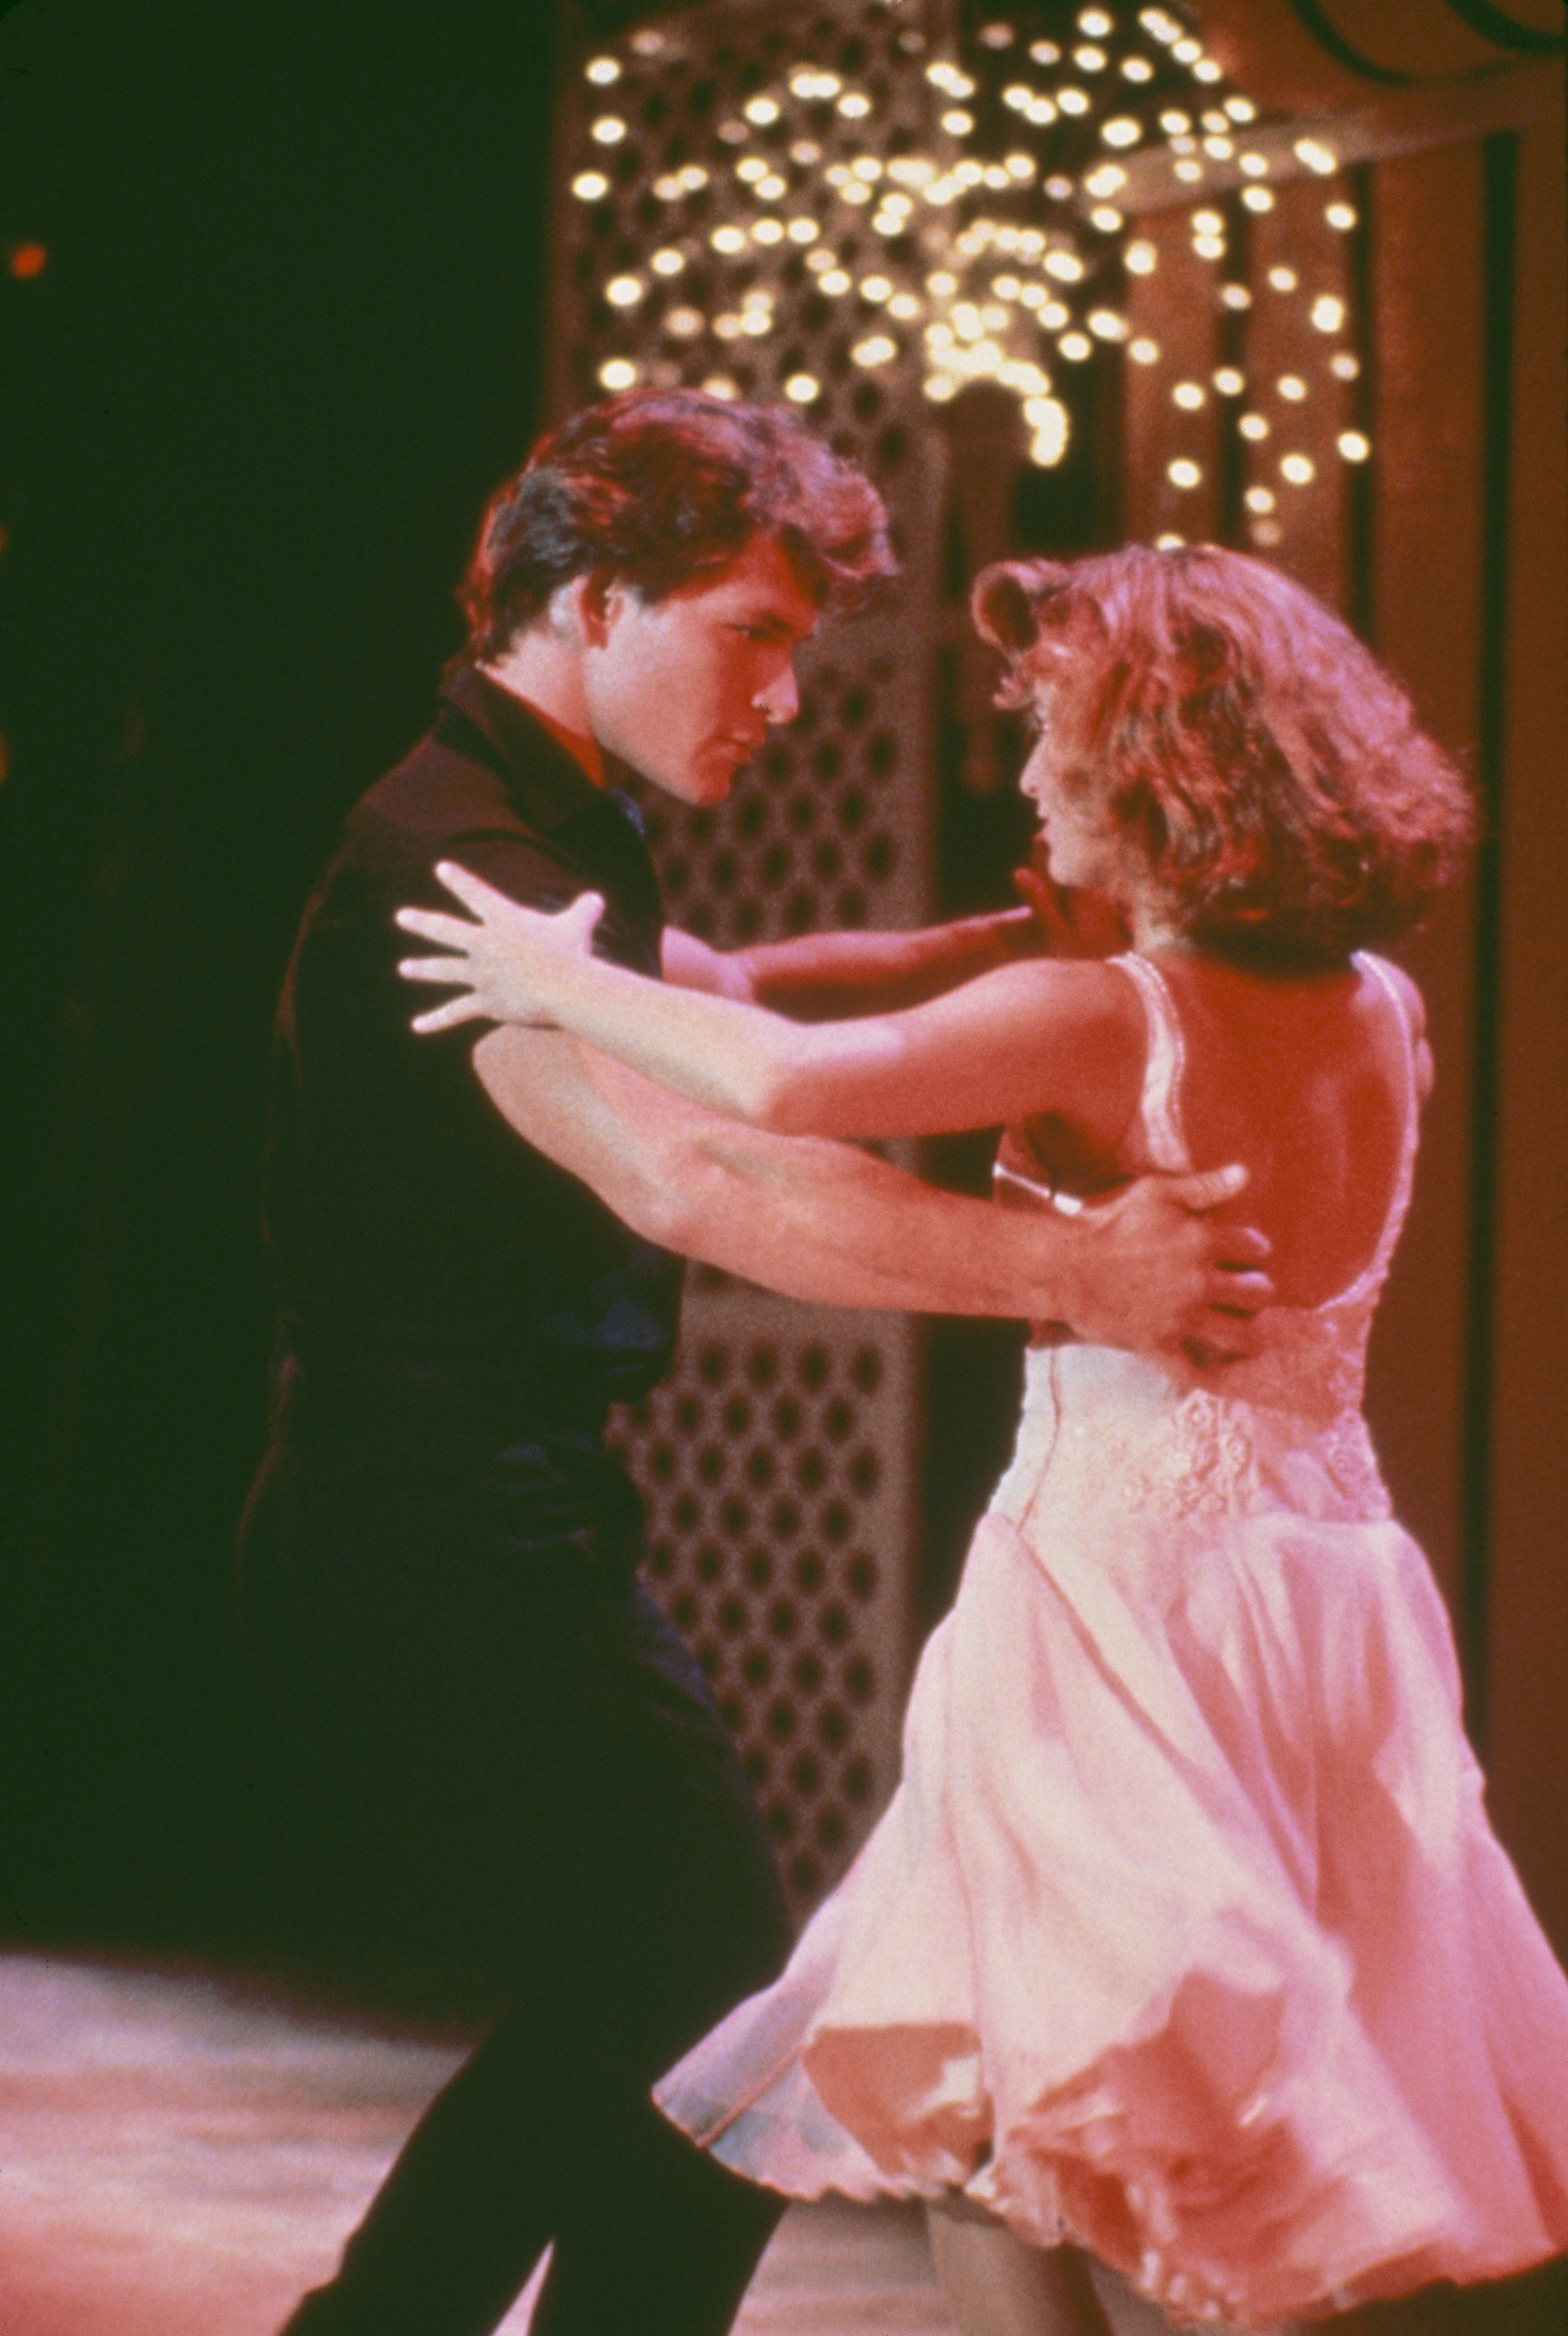 Patrick Swayze and Jennifer Grey on the set of "Dirty Dancing" in 1987 | Source: Getty Images